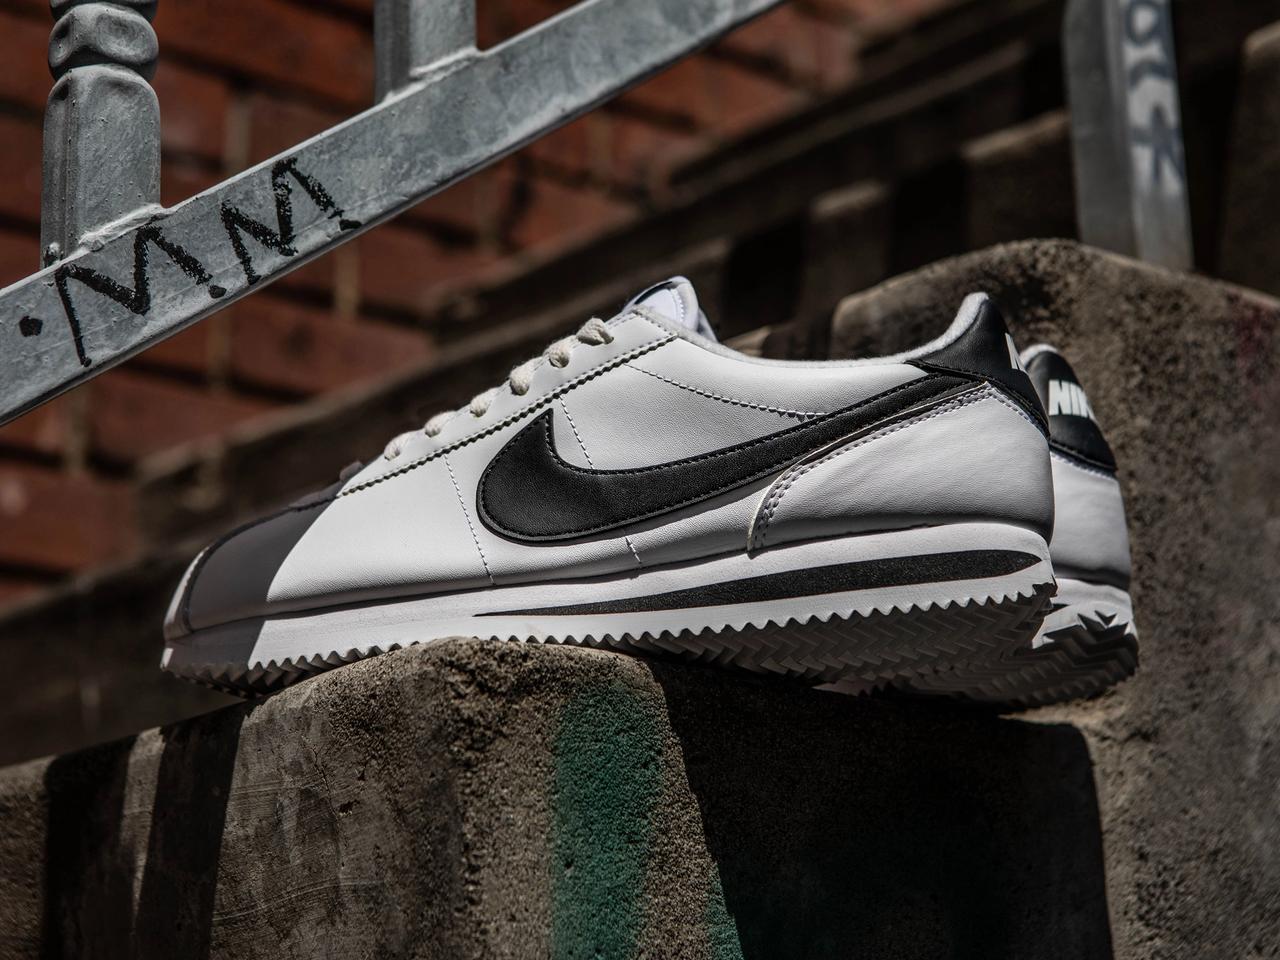 Why the Nike Cortez Became One of MS-13's Most Identifiable Hallmarks - Freaker